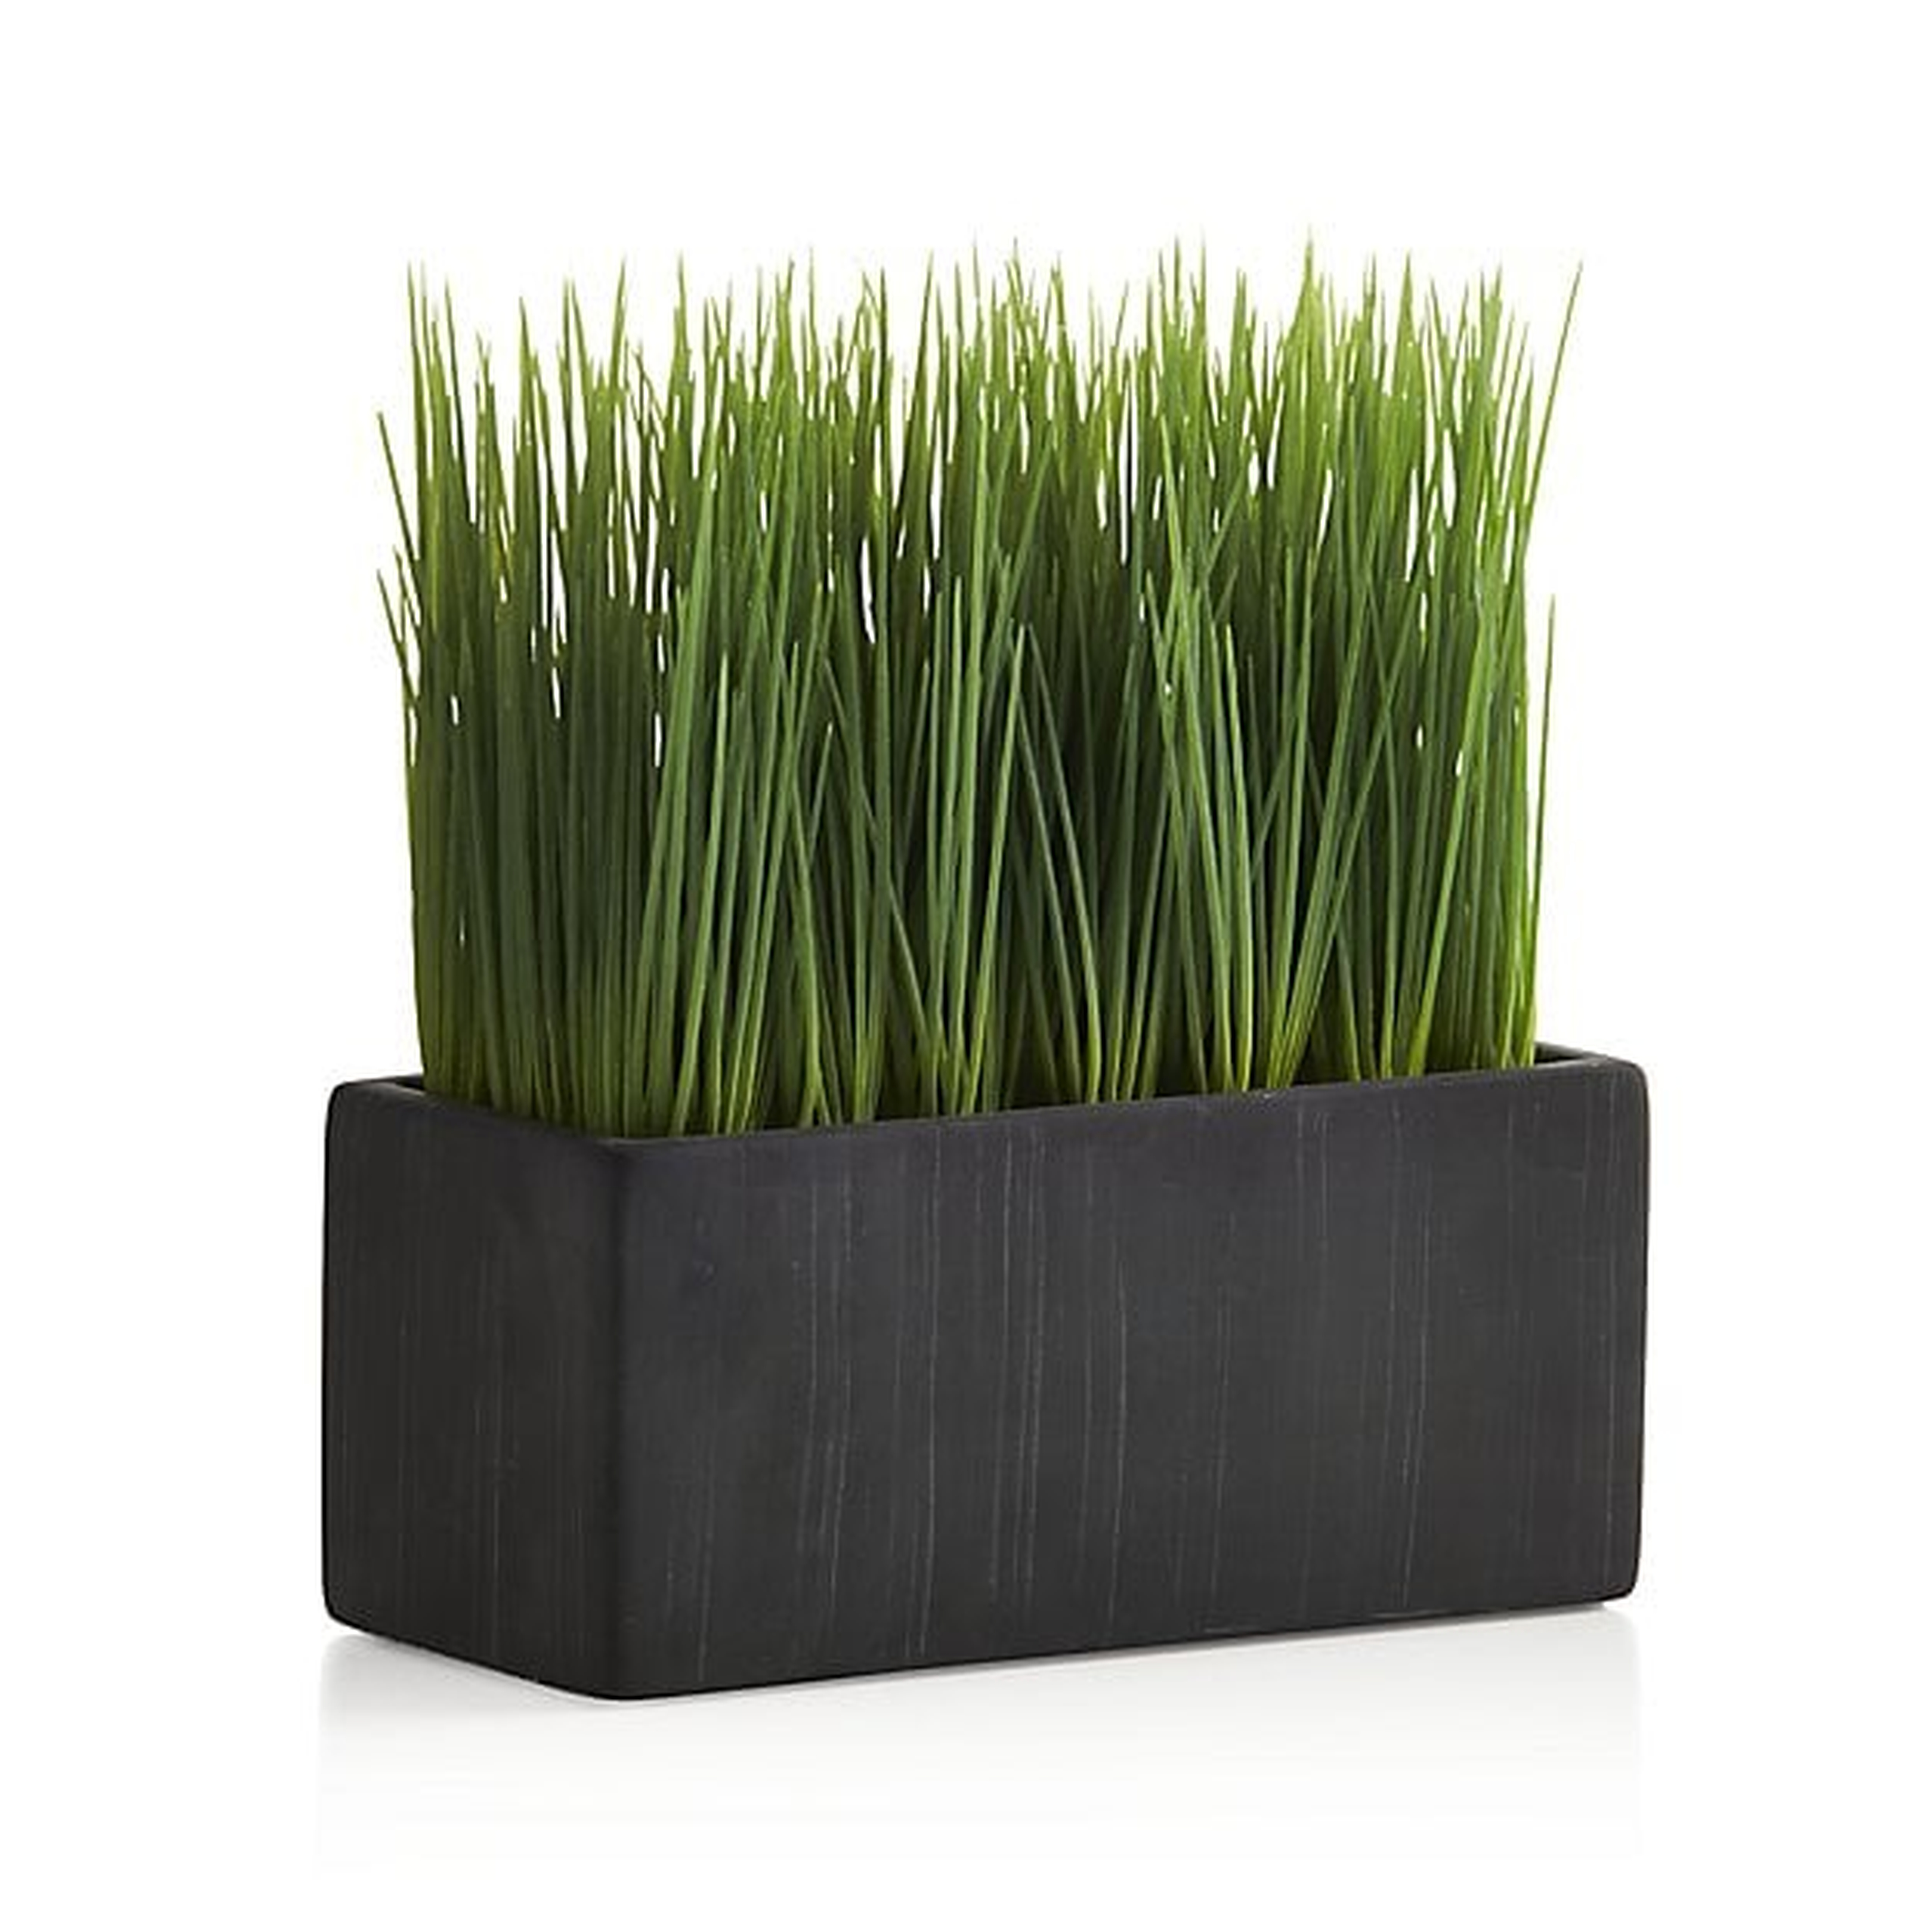 Large Potted Grass - Crate and Barrel